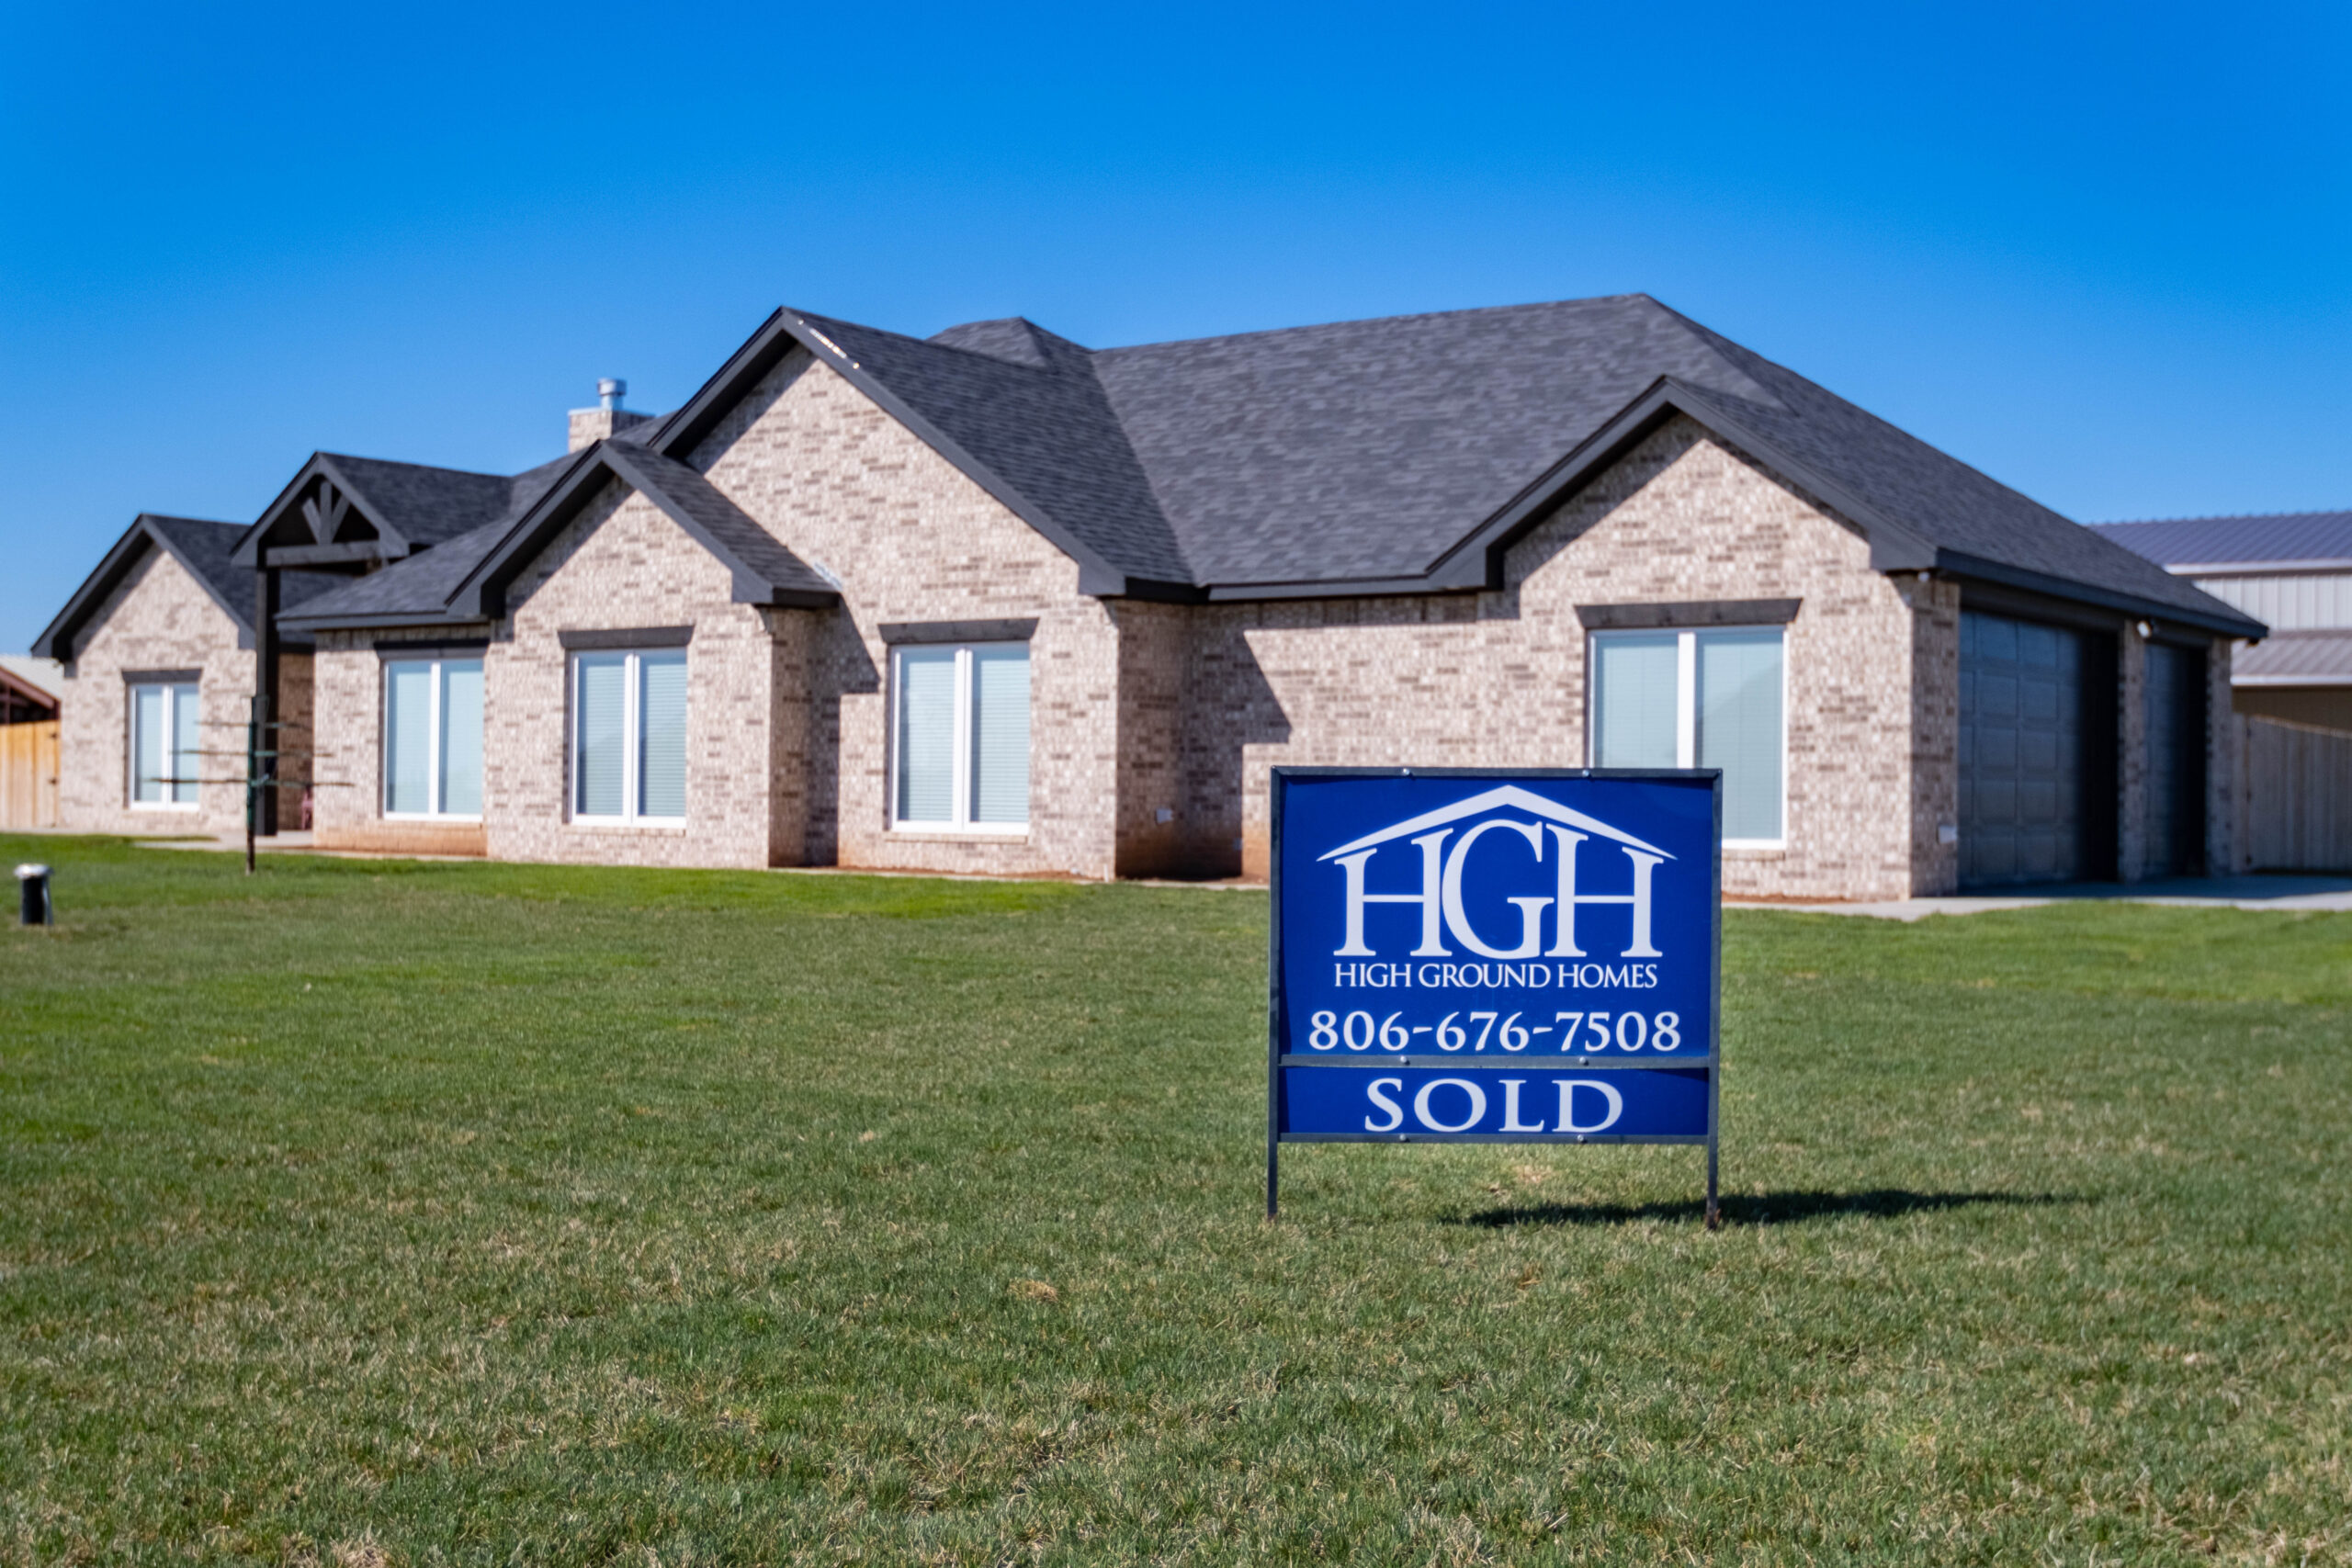 High Ground Homes, the best home builders in Amarillo, TX.